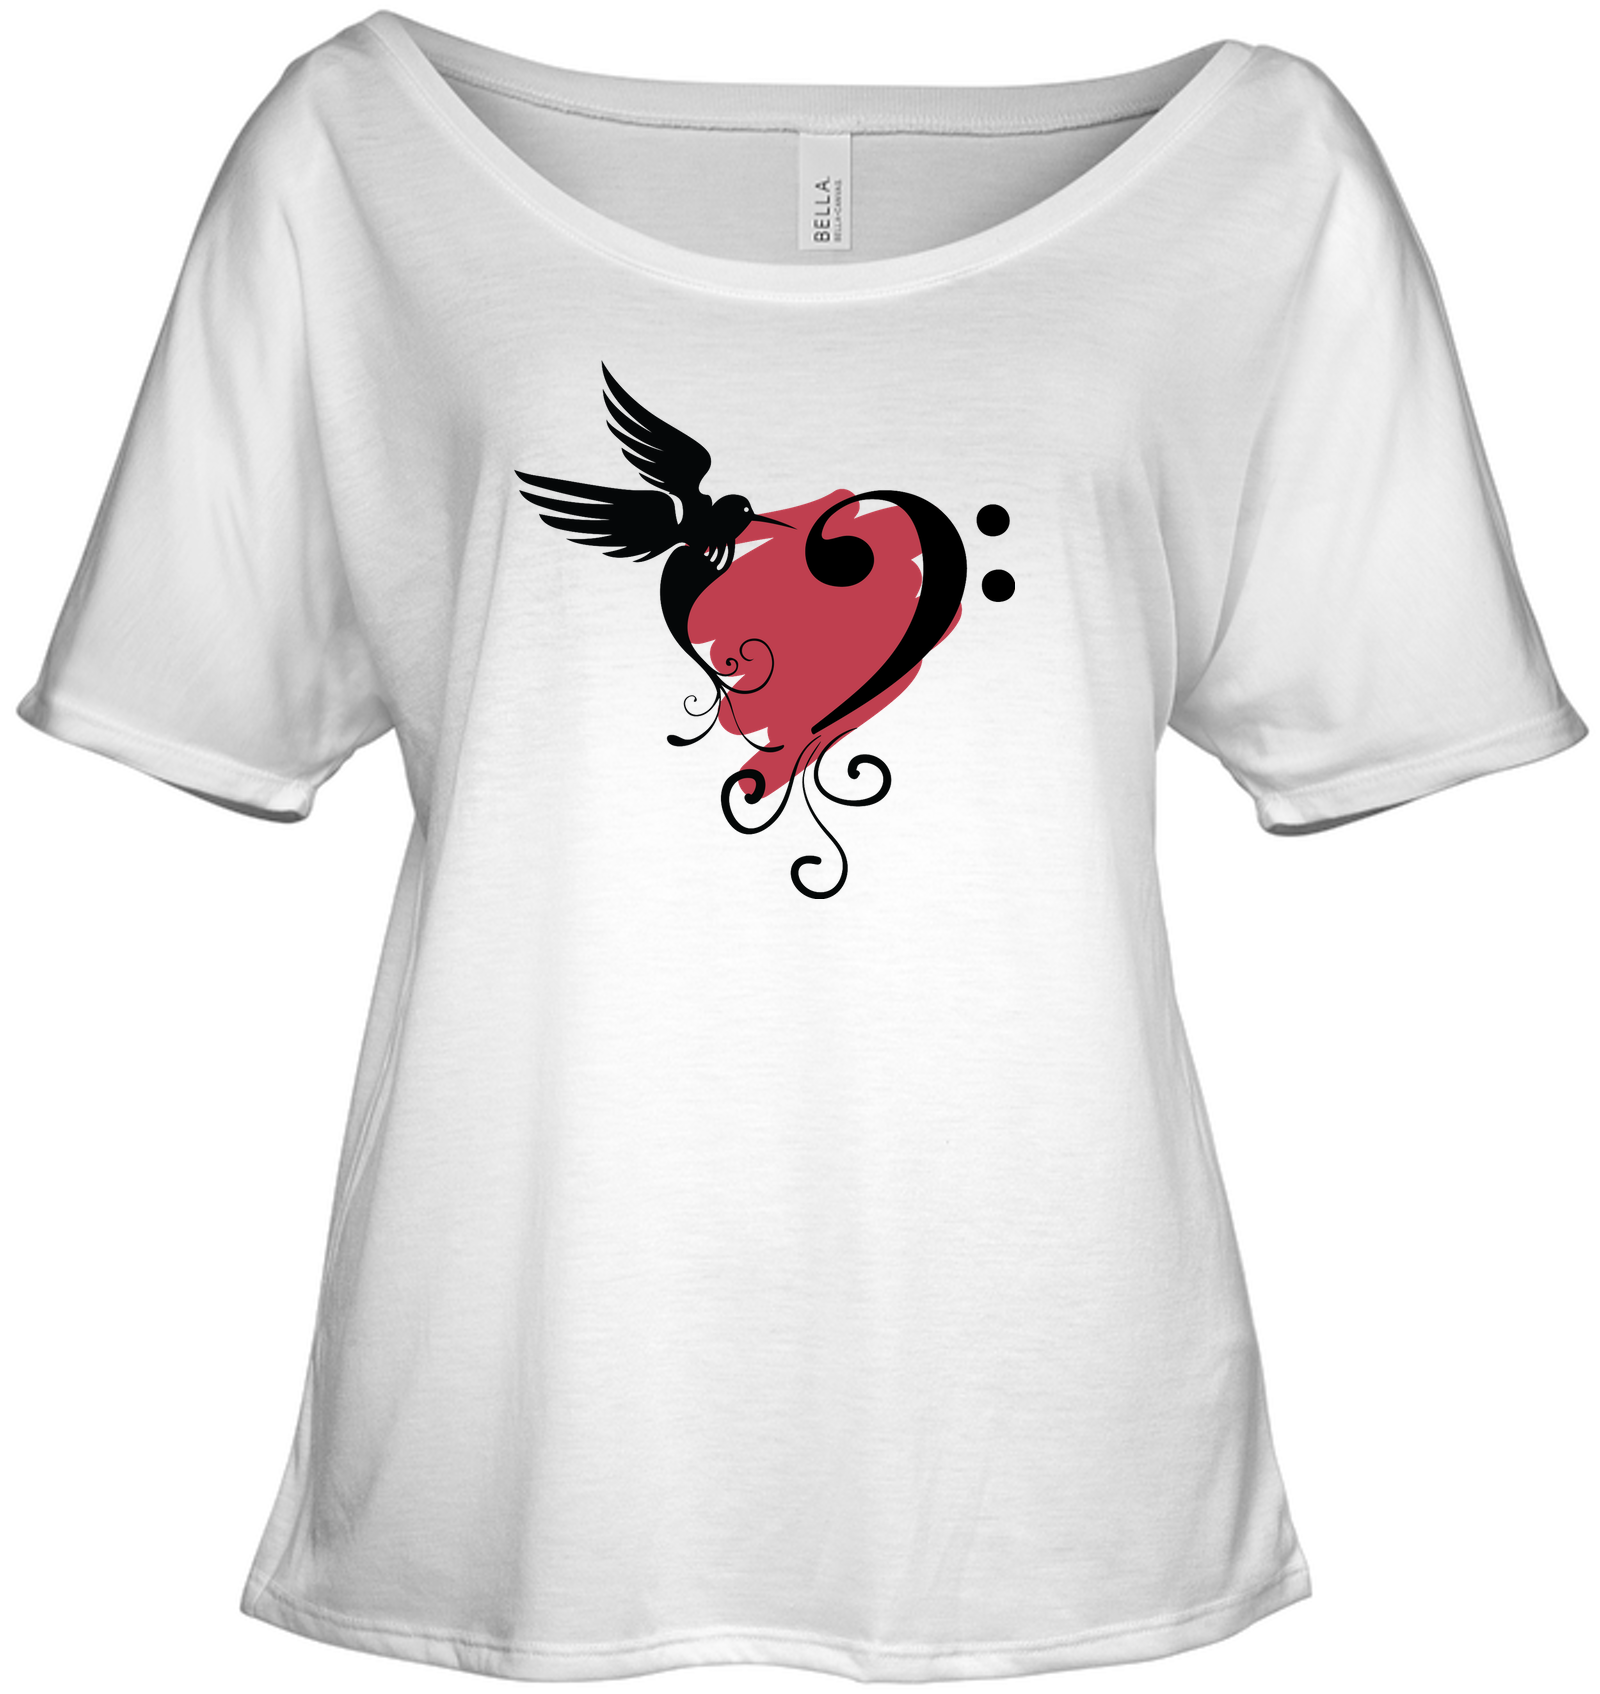 Bird and Musical Heart Red - Bella + Canvas Women's Slouchy Tee